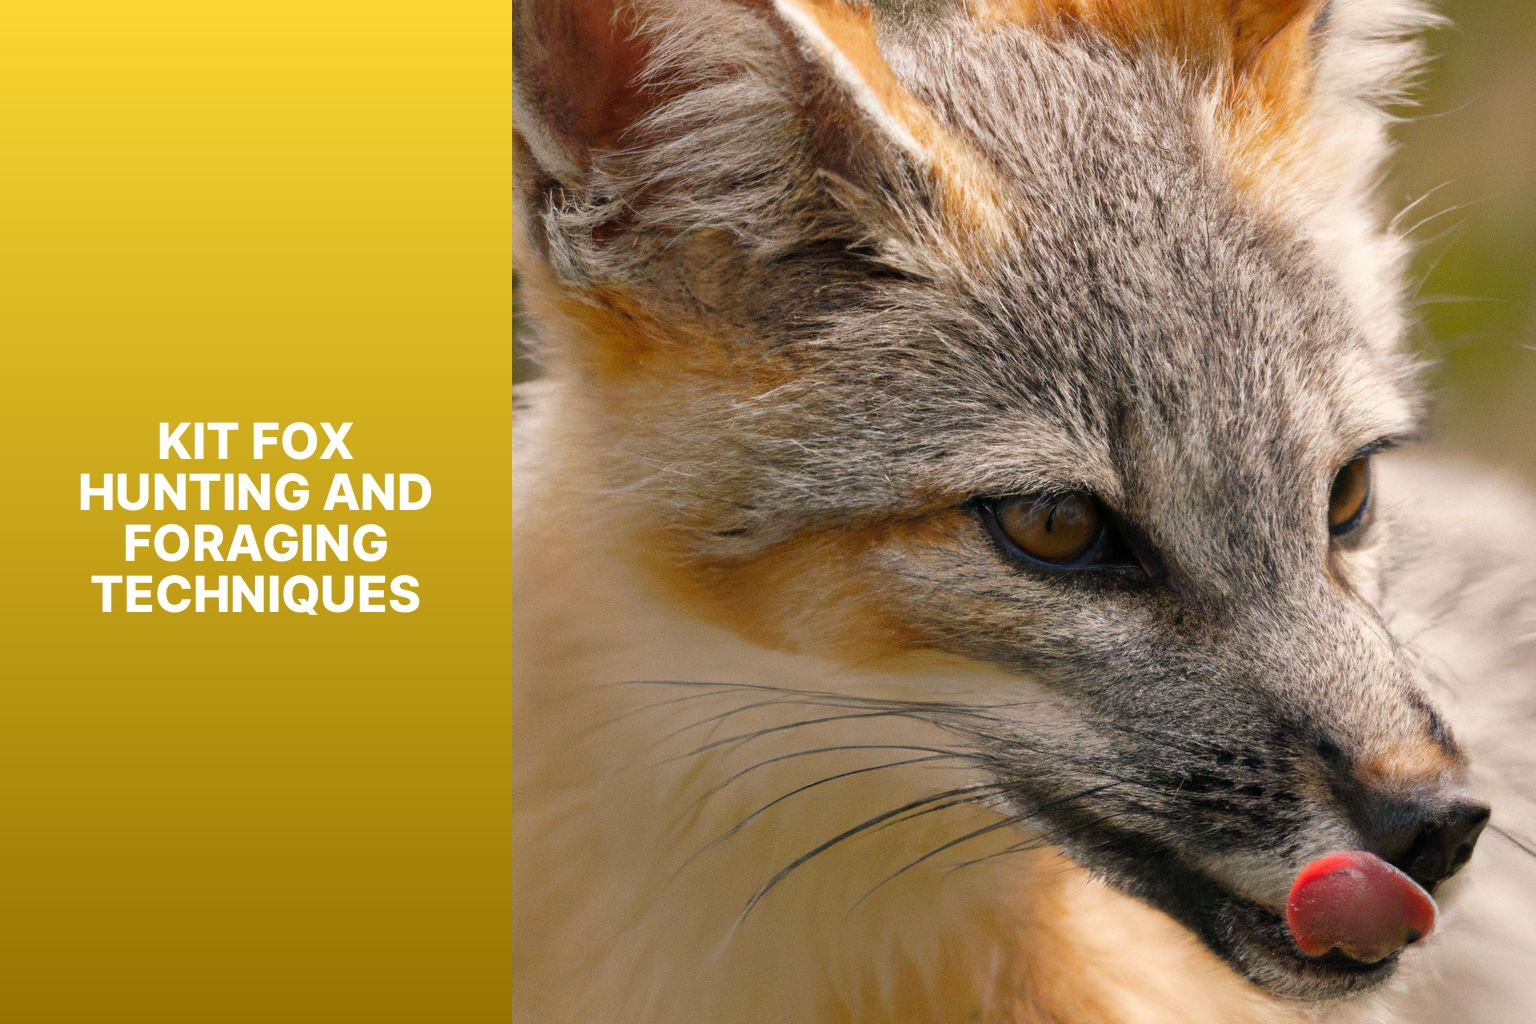 Kit Fox Hunting and Foraging Techniques - Kit Fox Survival Skills 